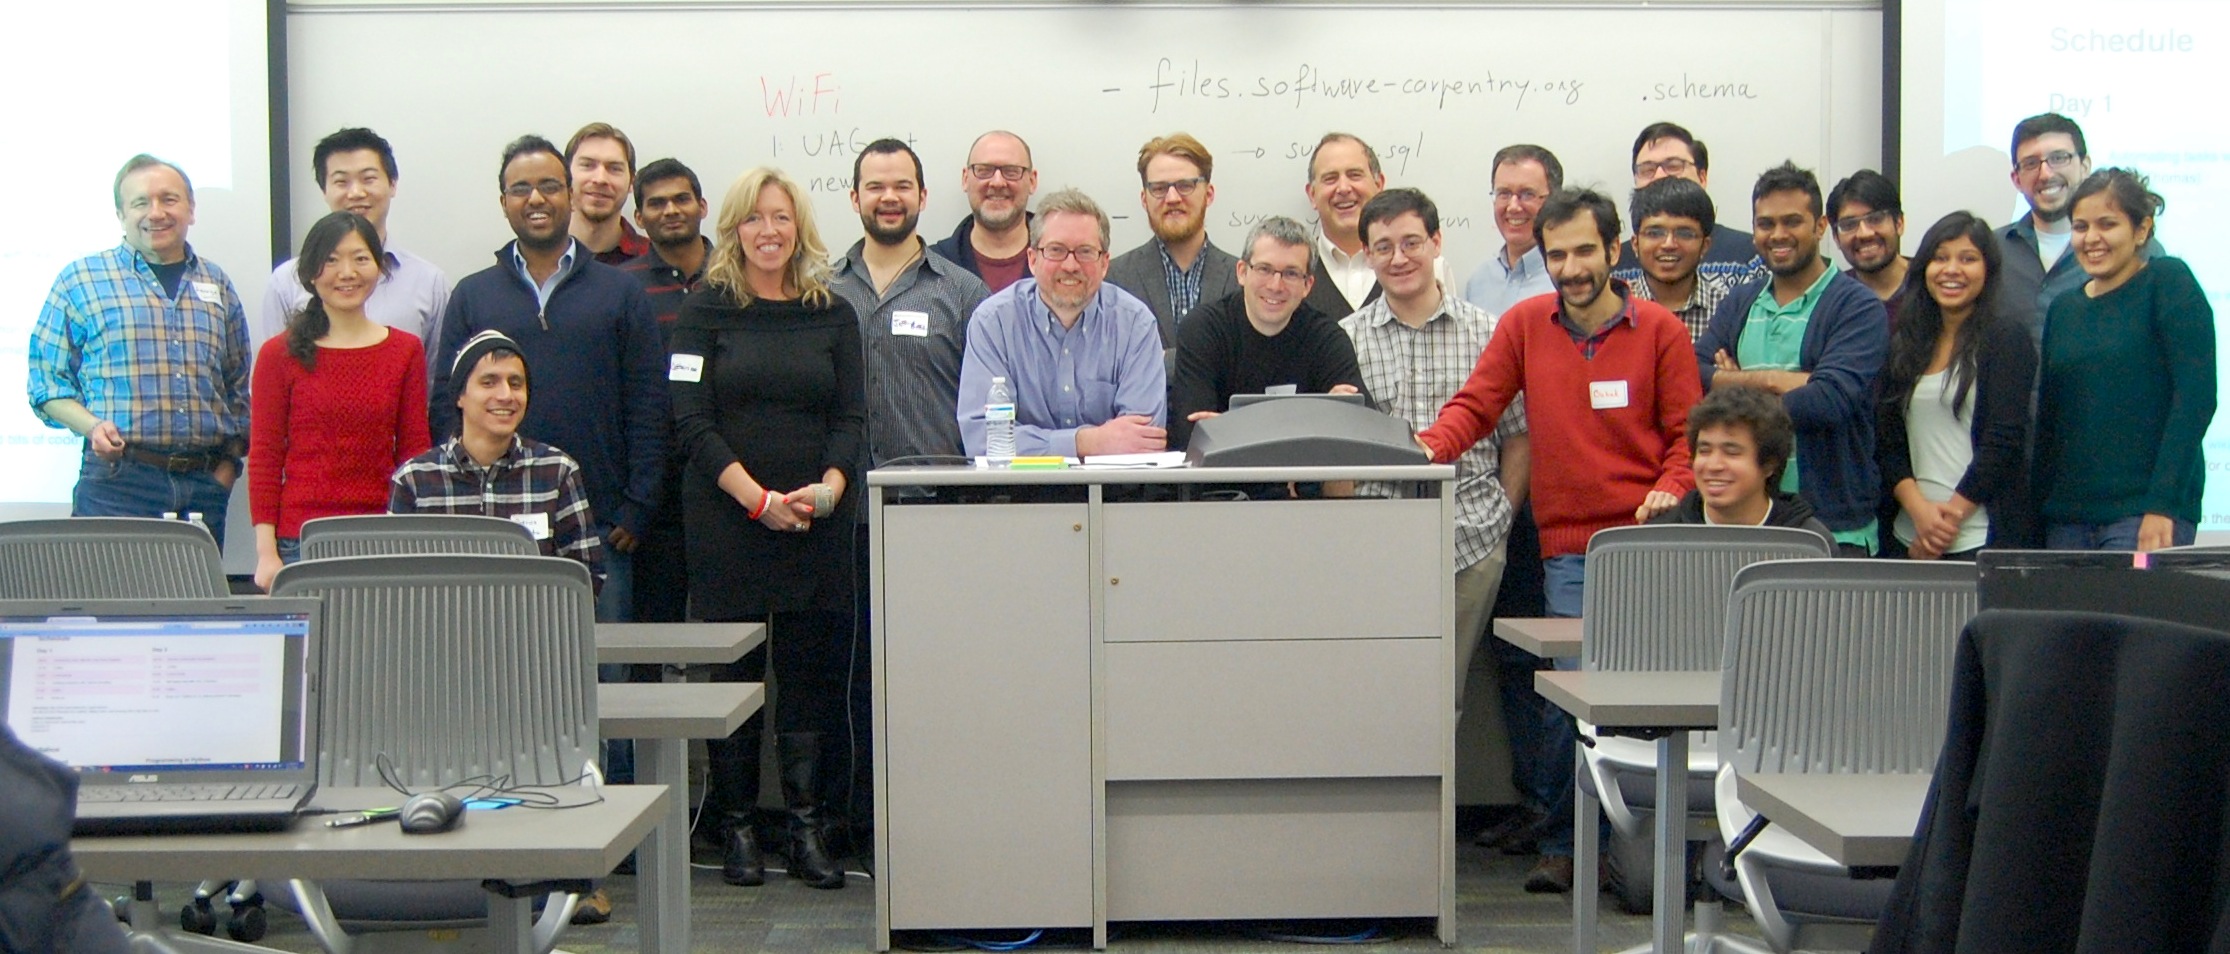 Software Carpentry Workshop attendees at UAlbany Jan 31-Feb 1, 2015